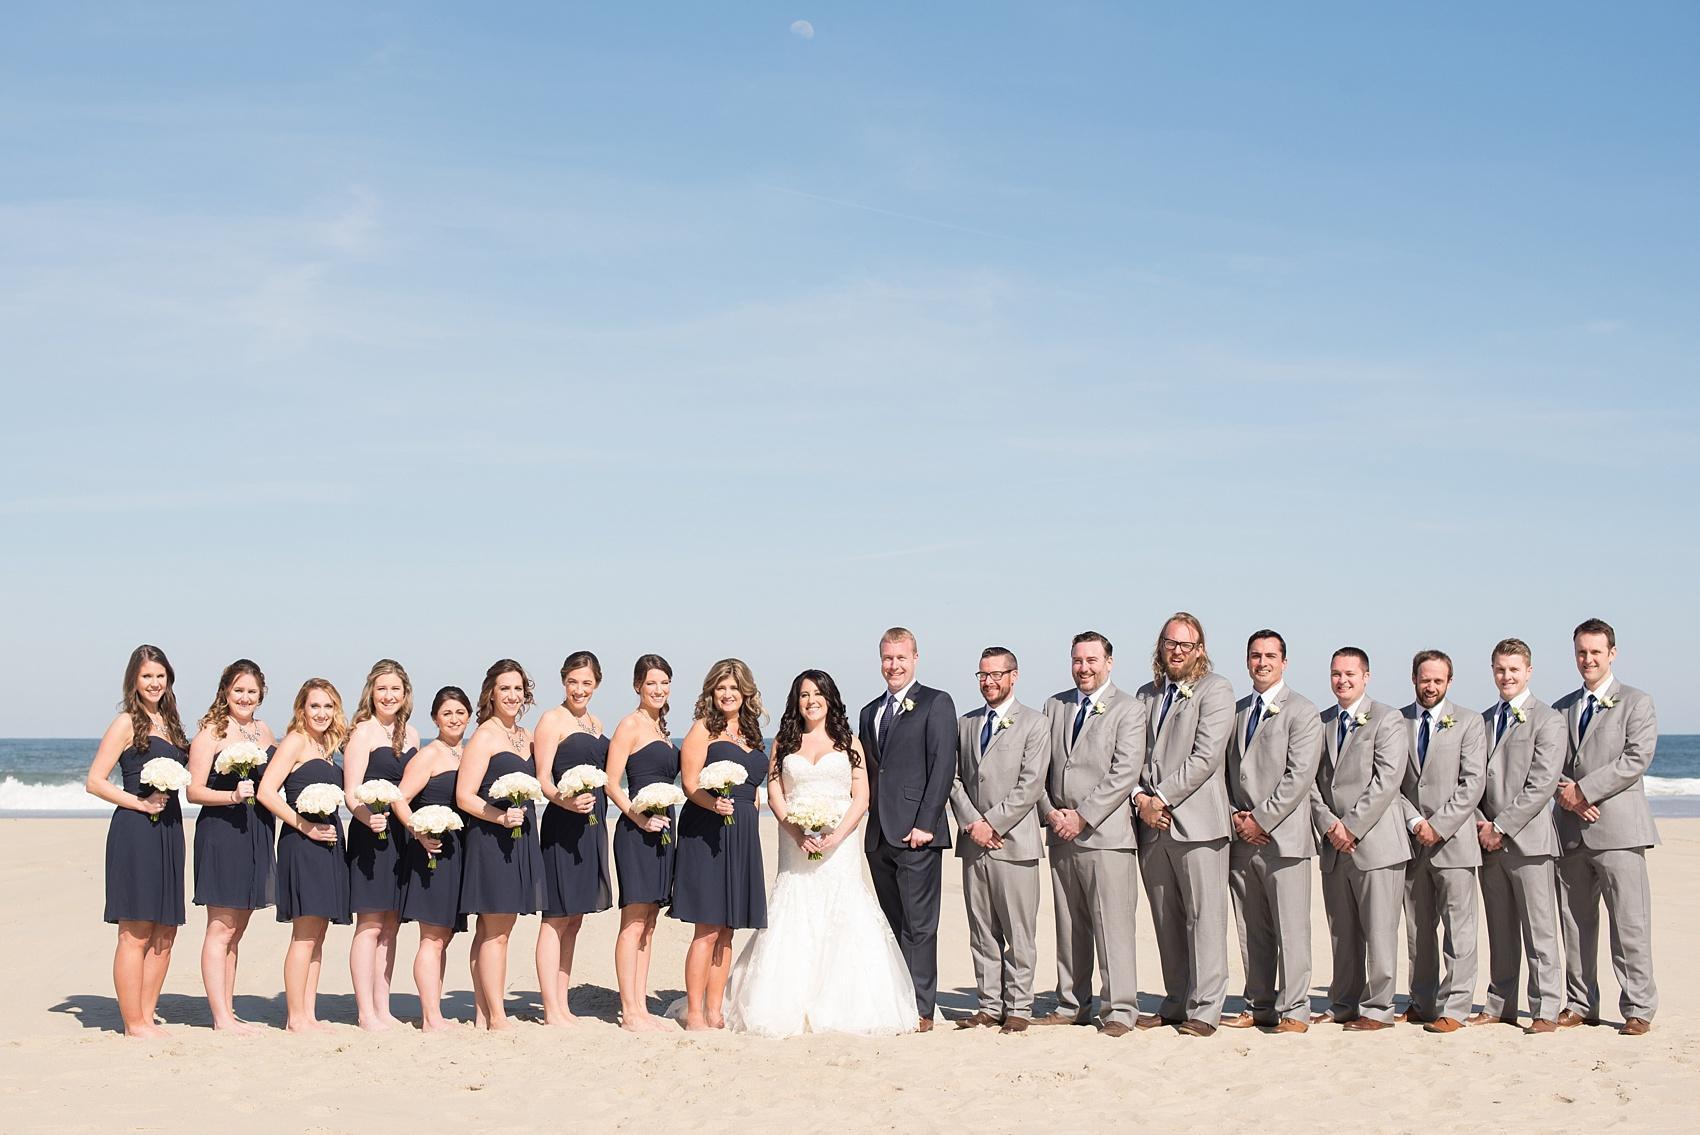 Photo by Mikkel Paige photography. Bridesmaids in navy chiffon short dresses with white rose bouquets. The groomsmen in grey suits and groom in a navy suit.